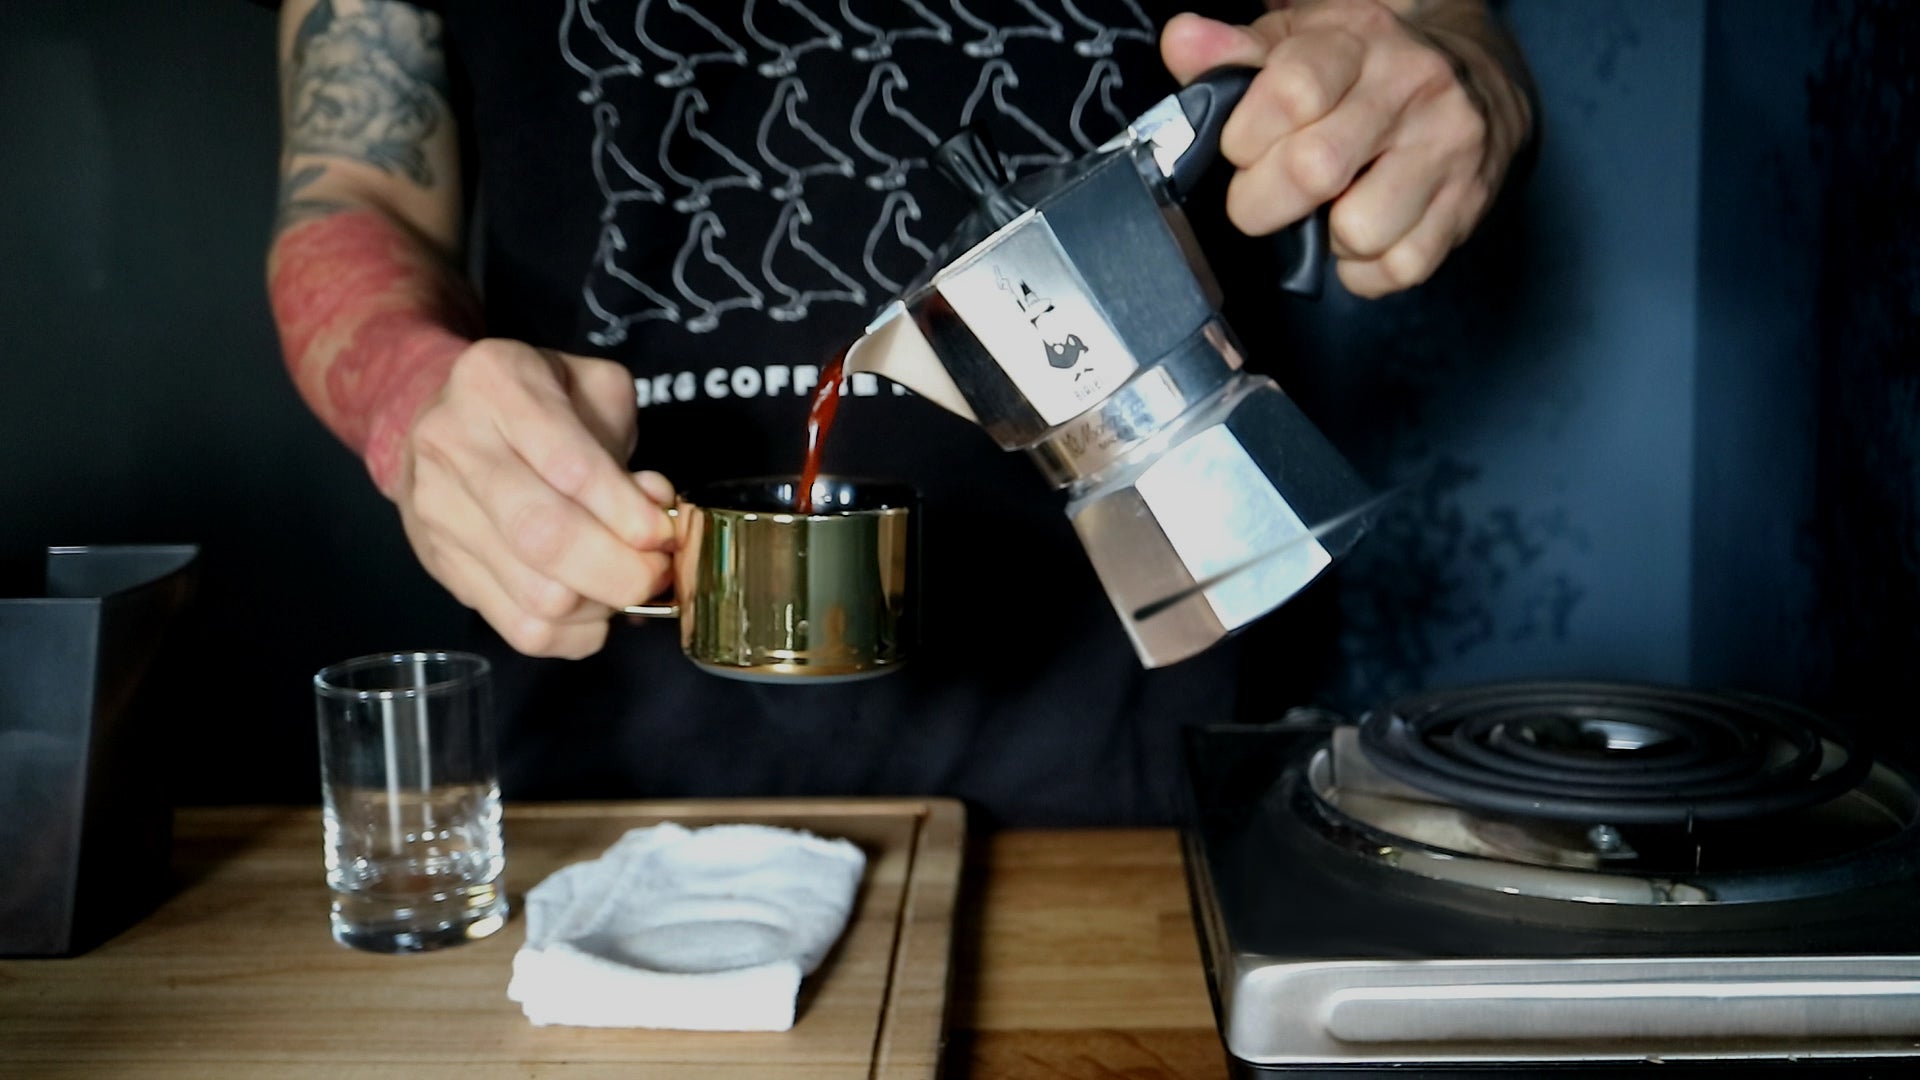 The Mooka Pot: Brewing Perfection